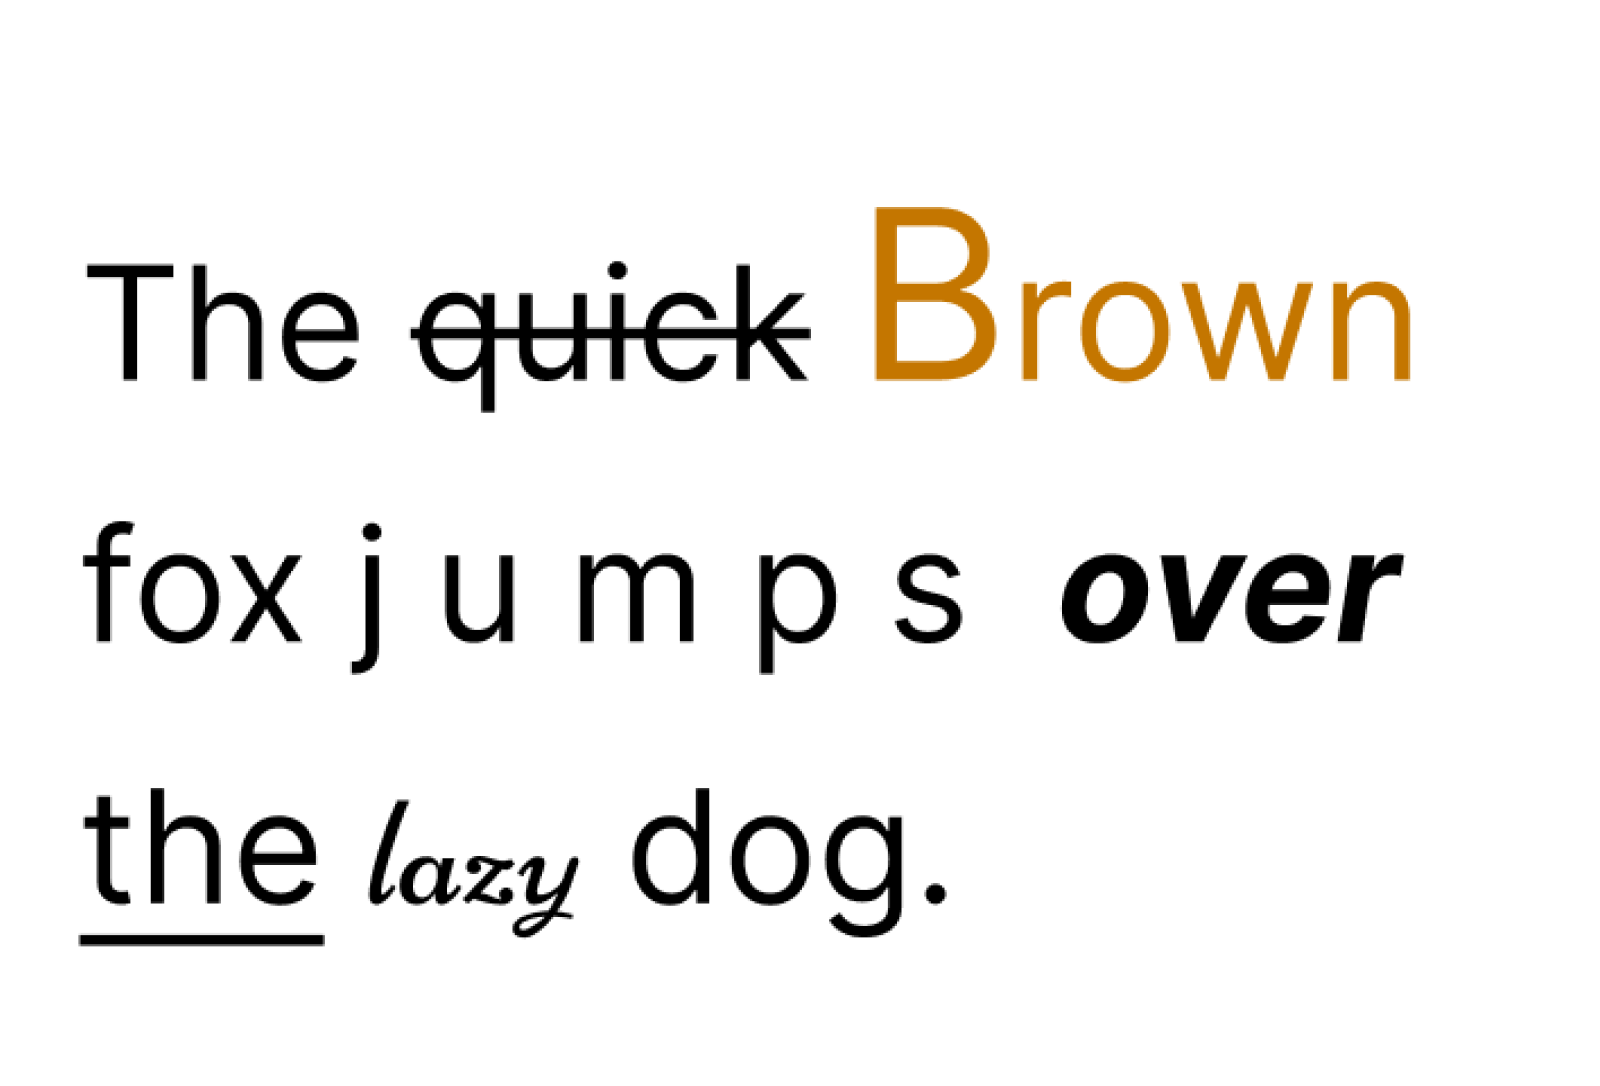 Mixed text styles in a single text element